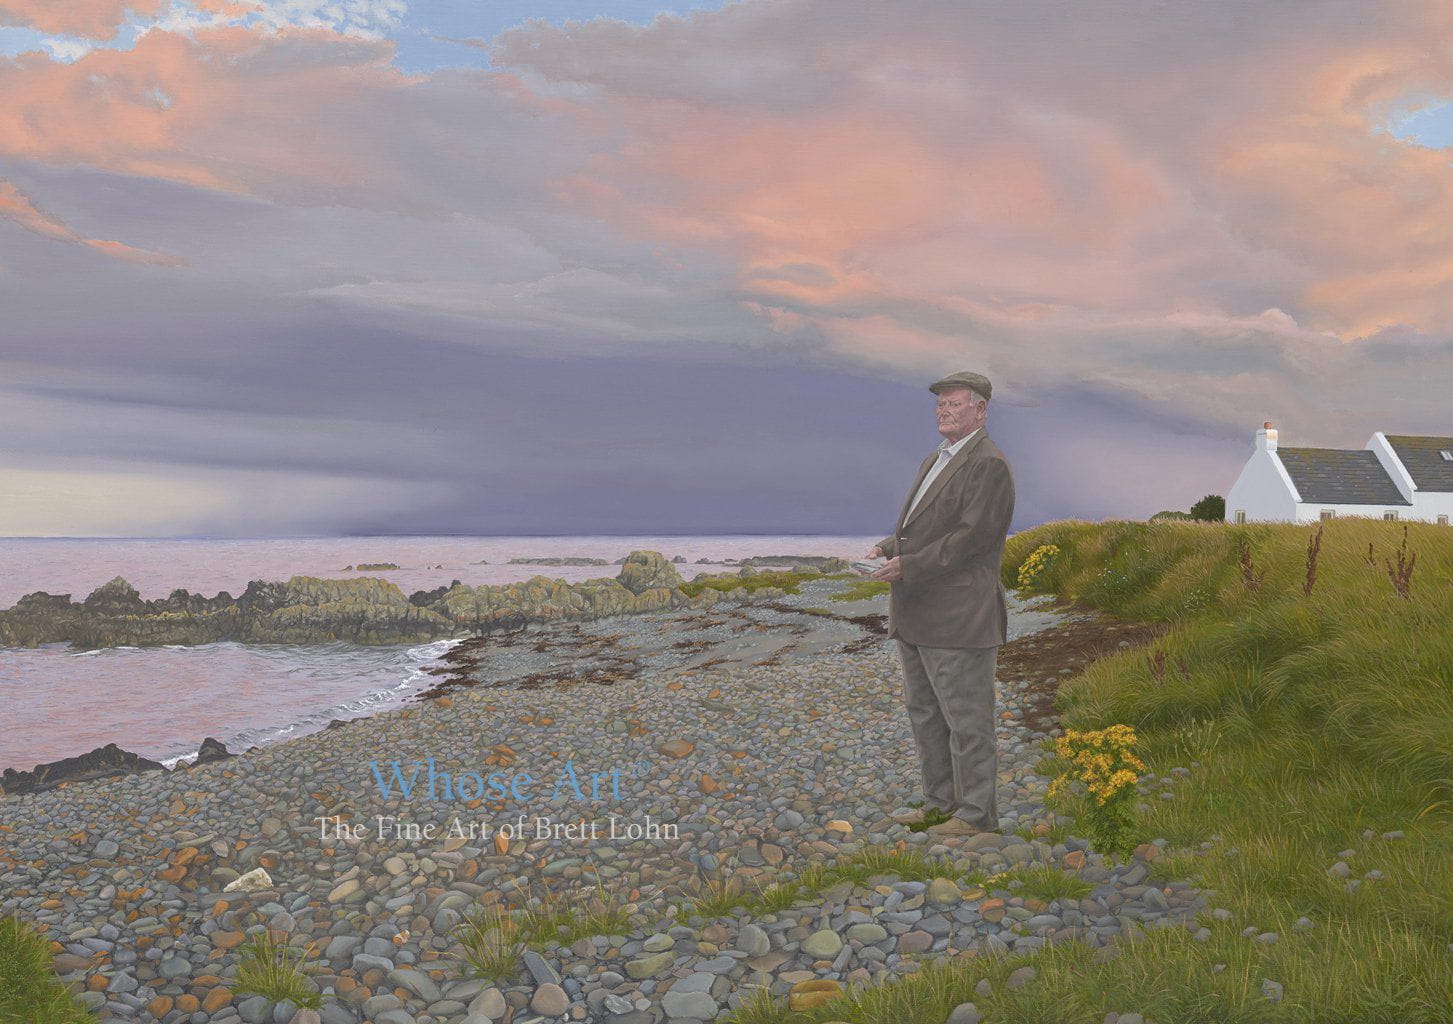 Art greeting card featuring a painting of a man on a rocky beach at dusk as a storm approaches. The card is blank inside